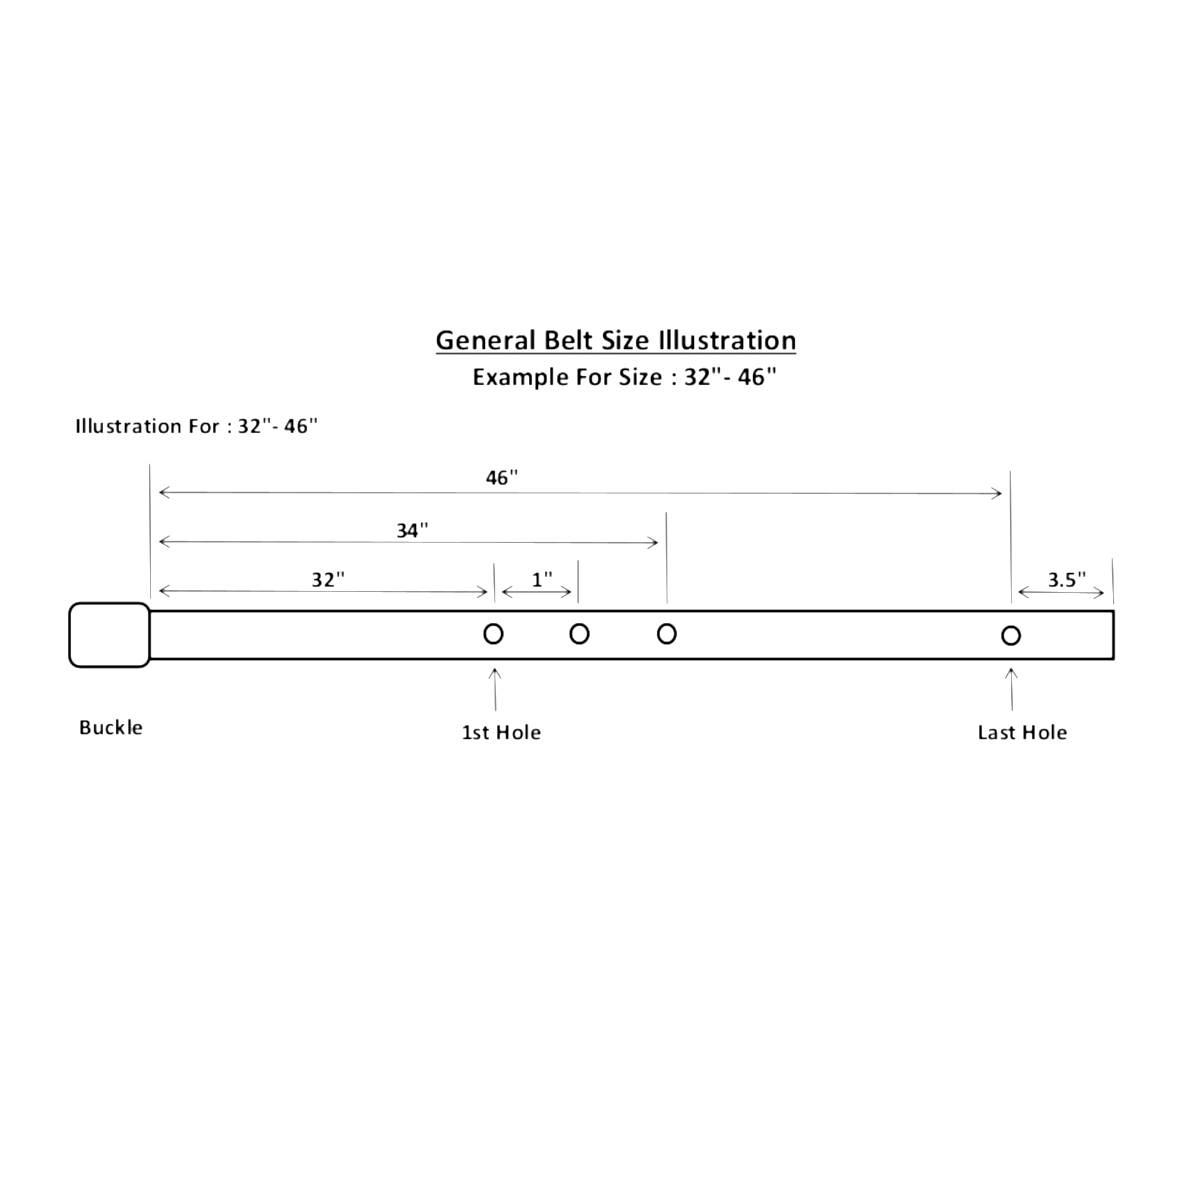 Illustration Showing Belt Measurement - The Drawing Shows How the Belt is Measured